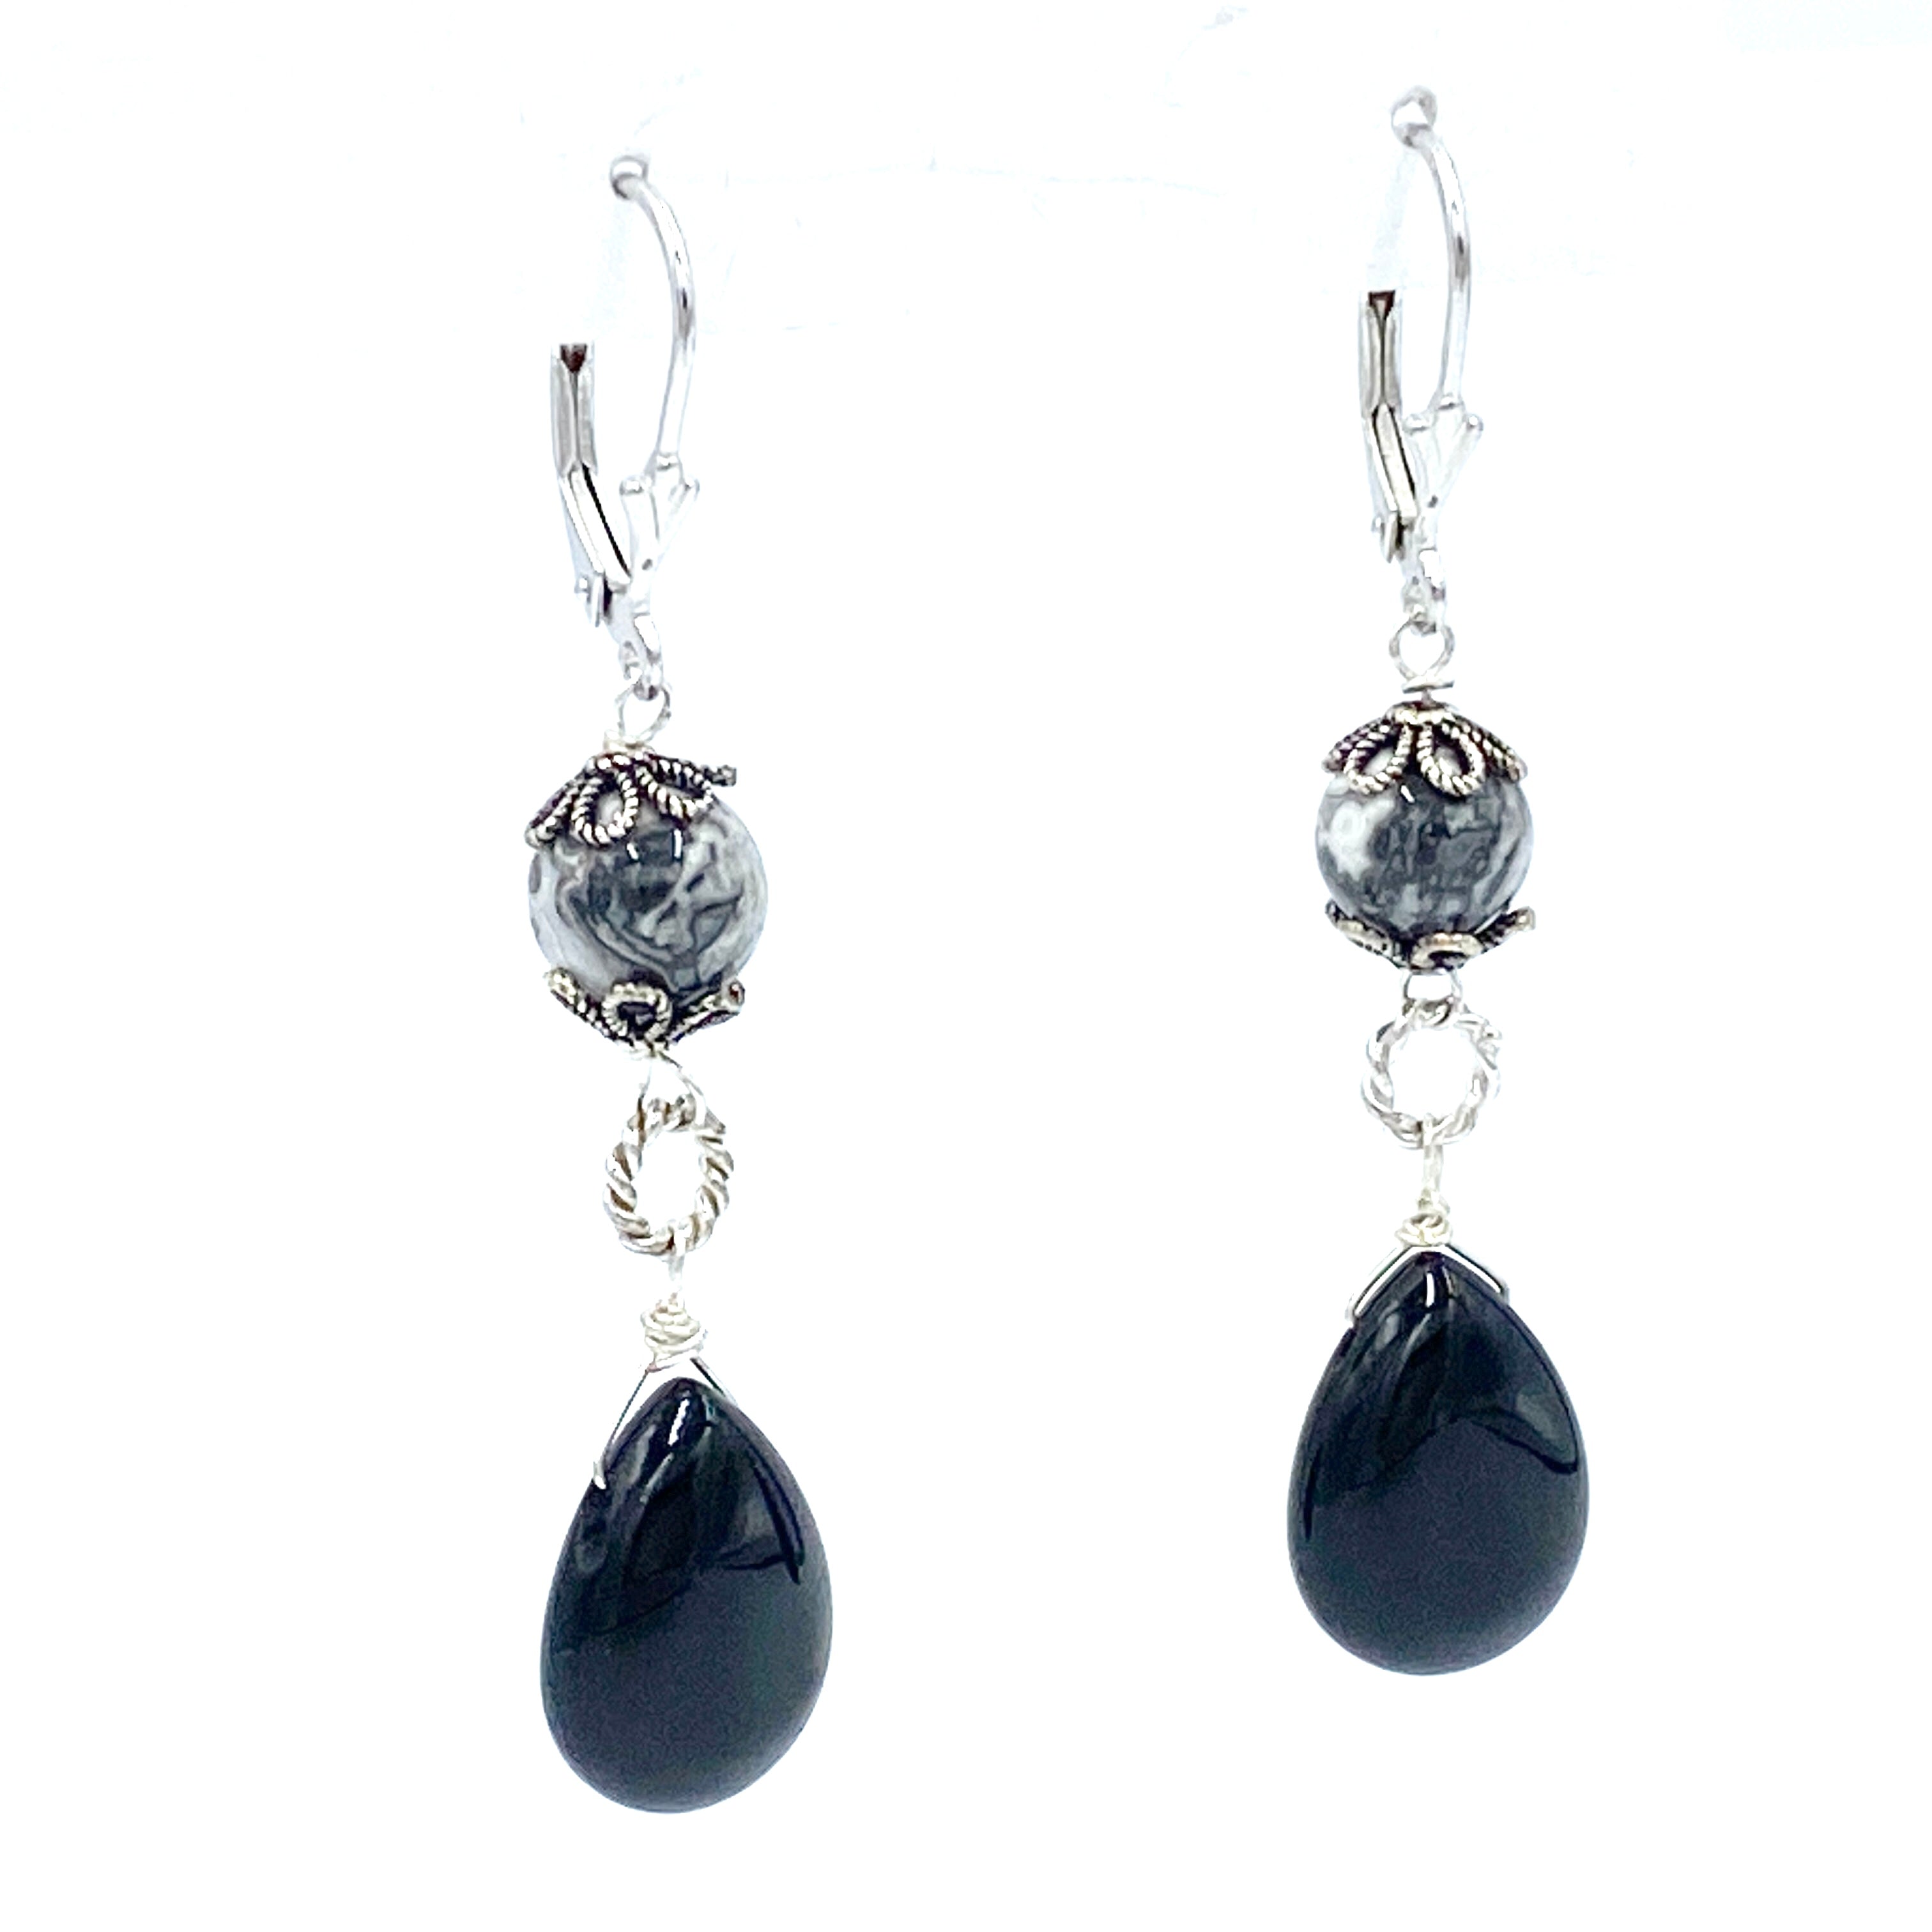 Joanna Bisley Black Onyx drop with Crazy Lace Agate and Sterling Silver earrings